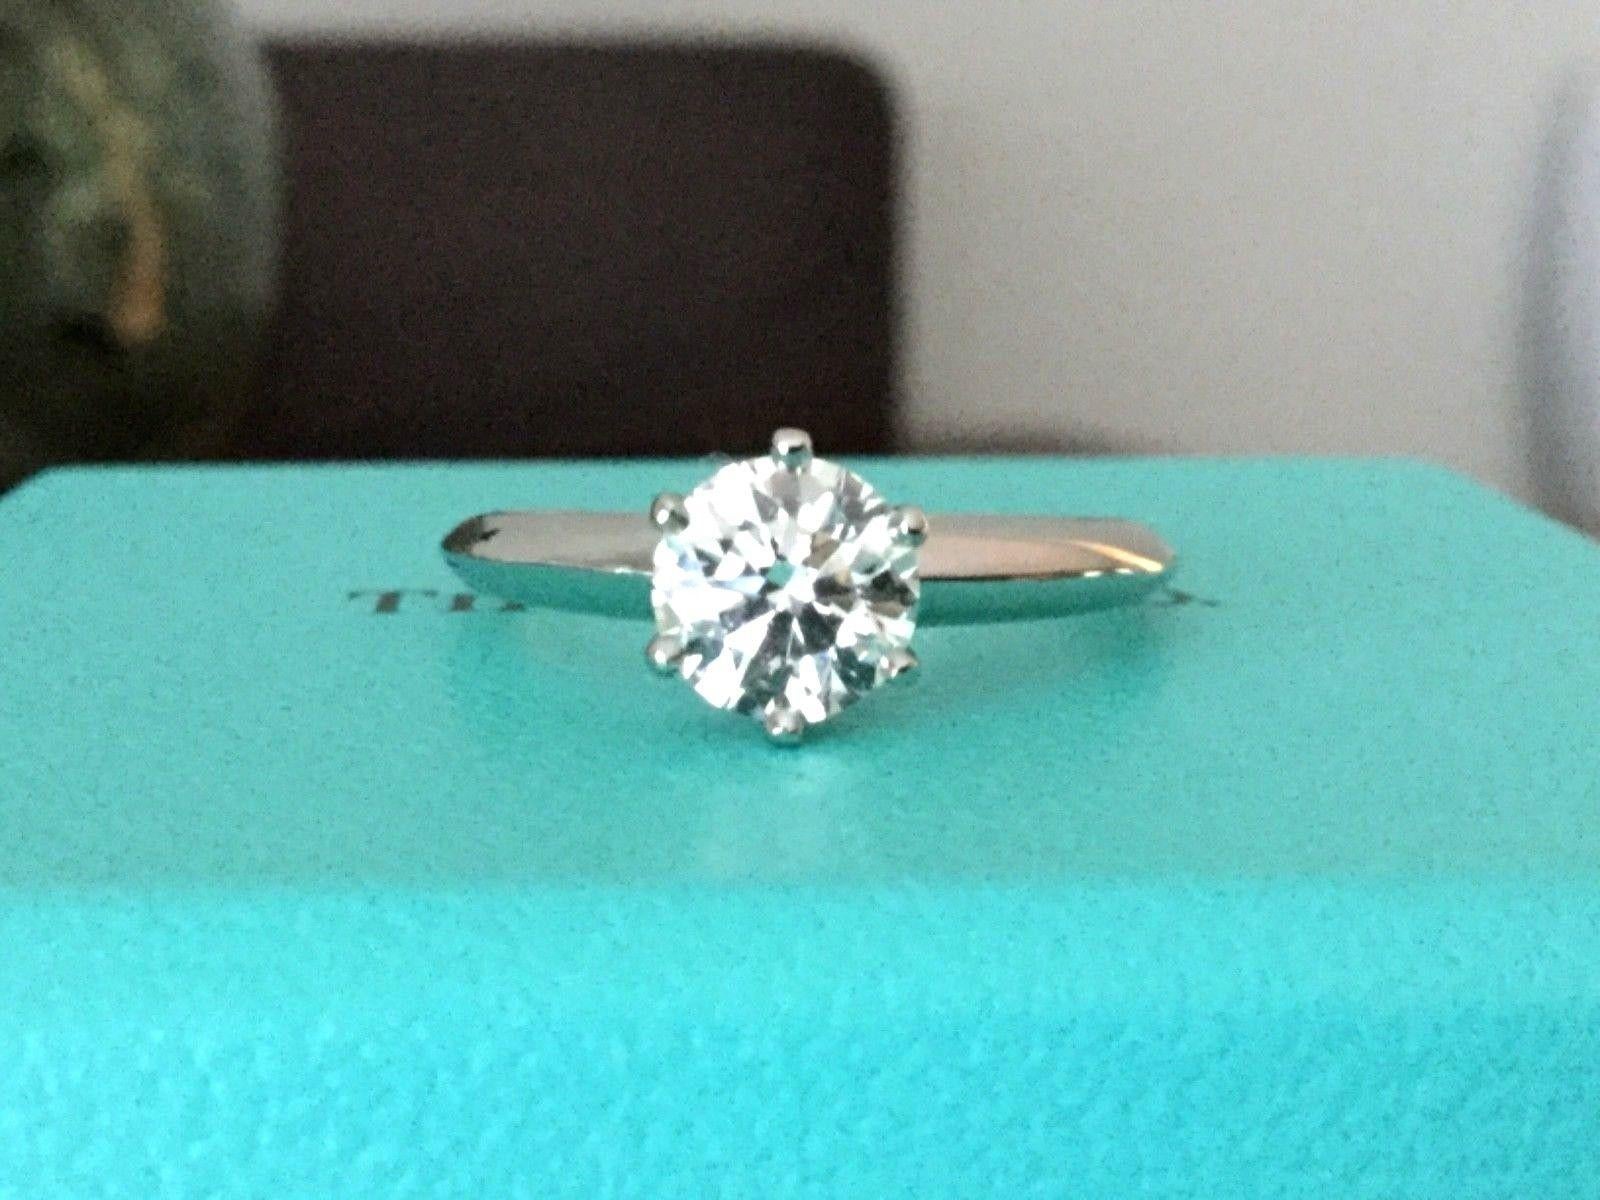 Being offered for your consideration is a beautiful Tiffany & Co Platinum and Diamond  .90 carat natural round engagement ring set in the classic 6 prong setting.  The ring was purchased in 2005 for over $10,000 and was barely worn.  Current retail